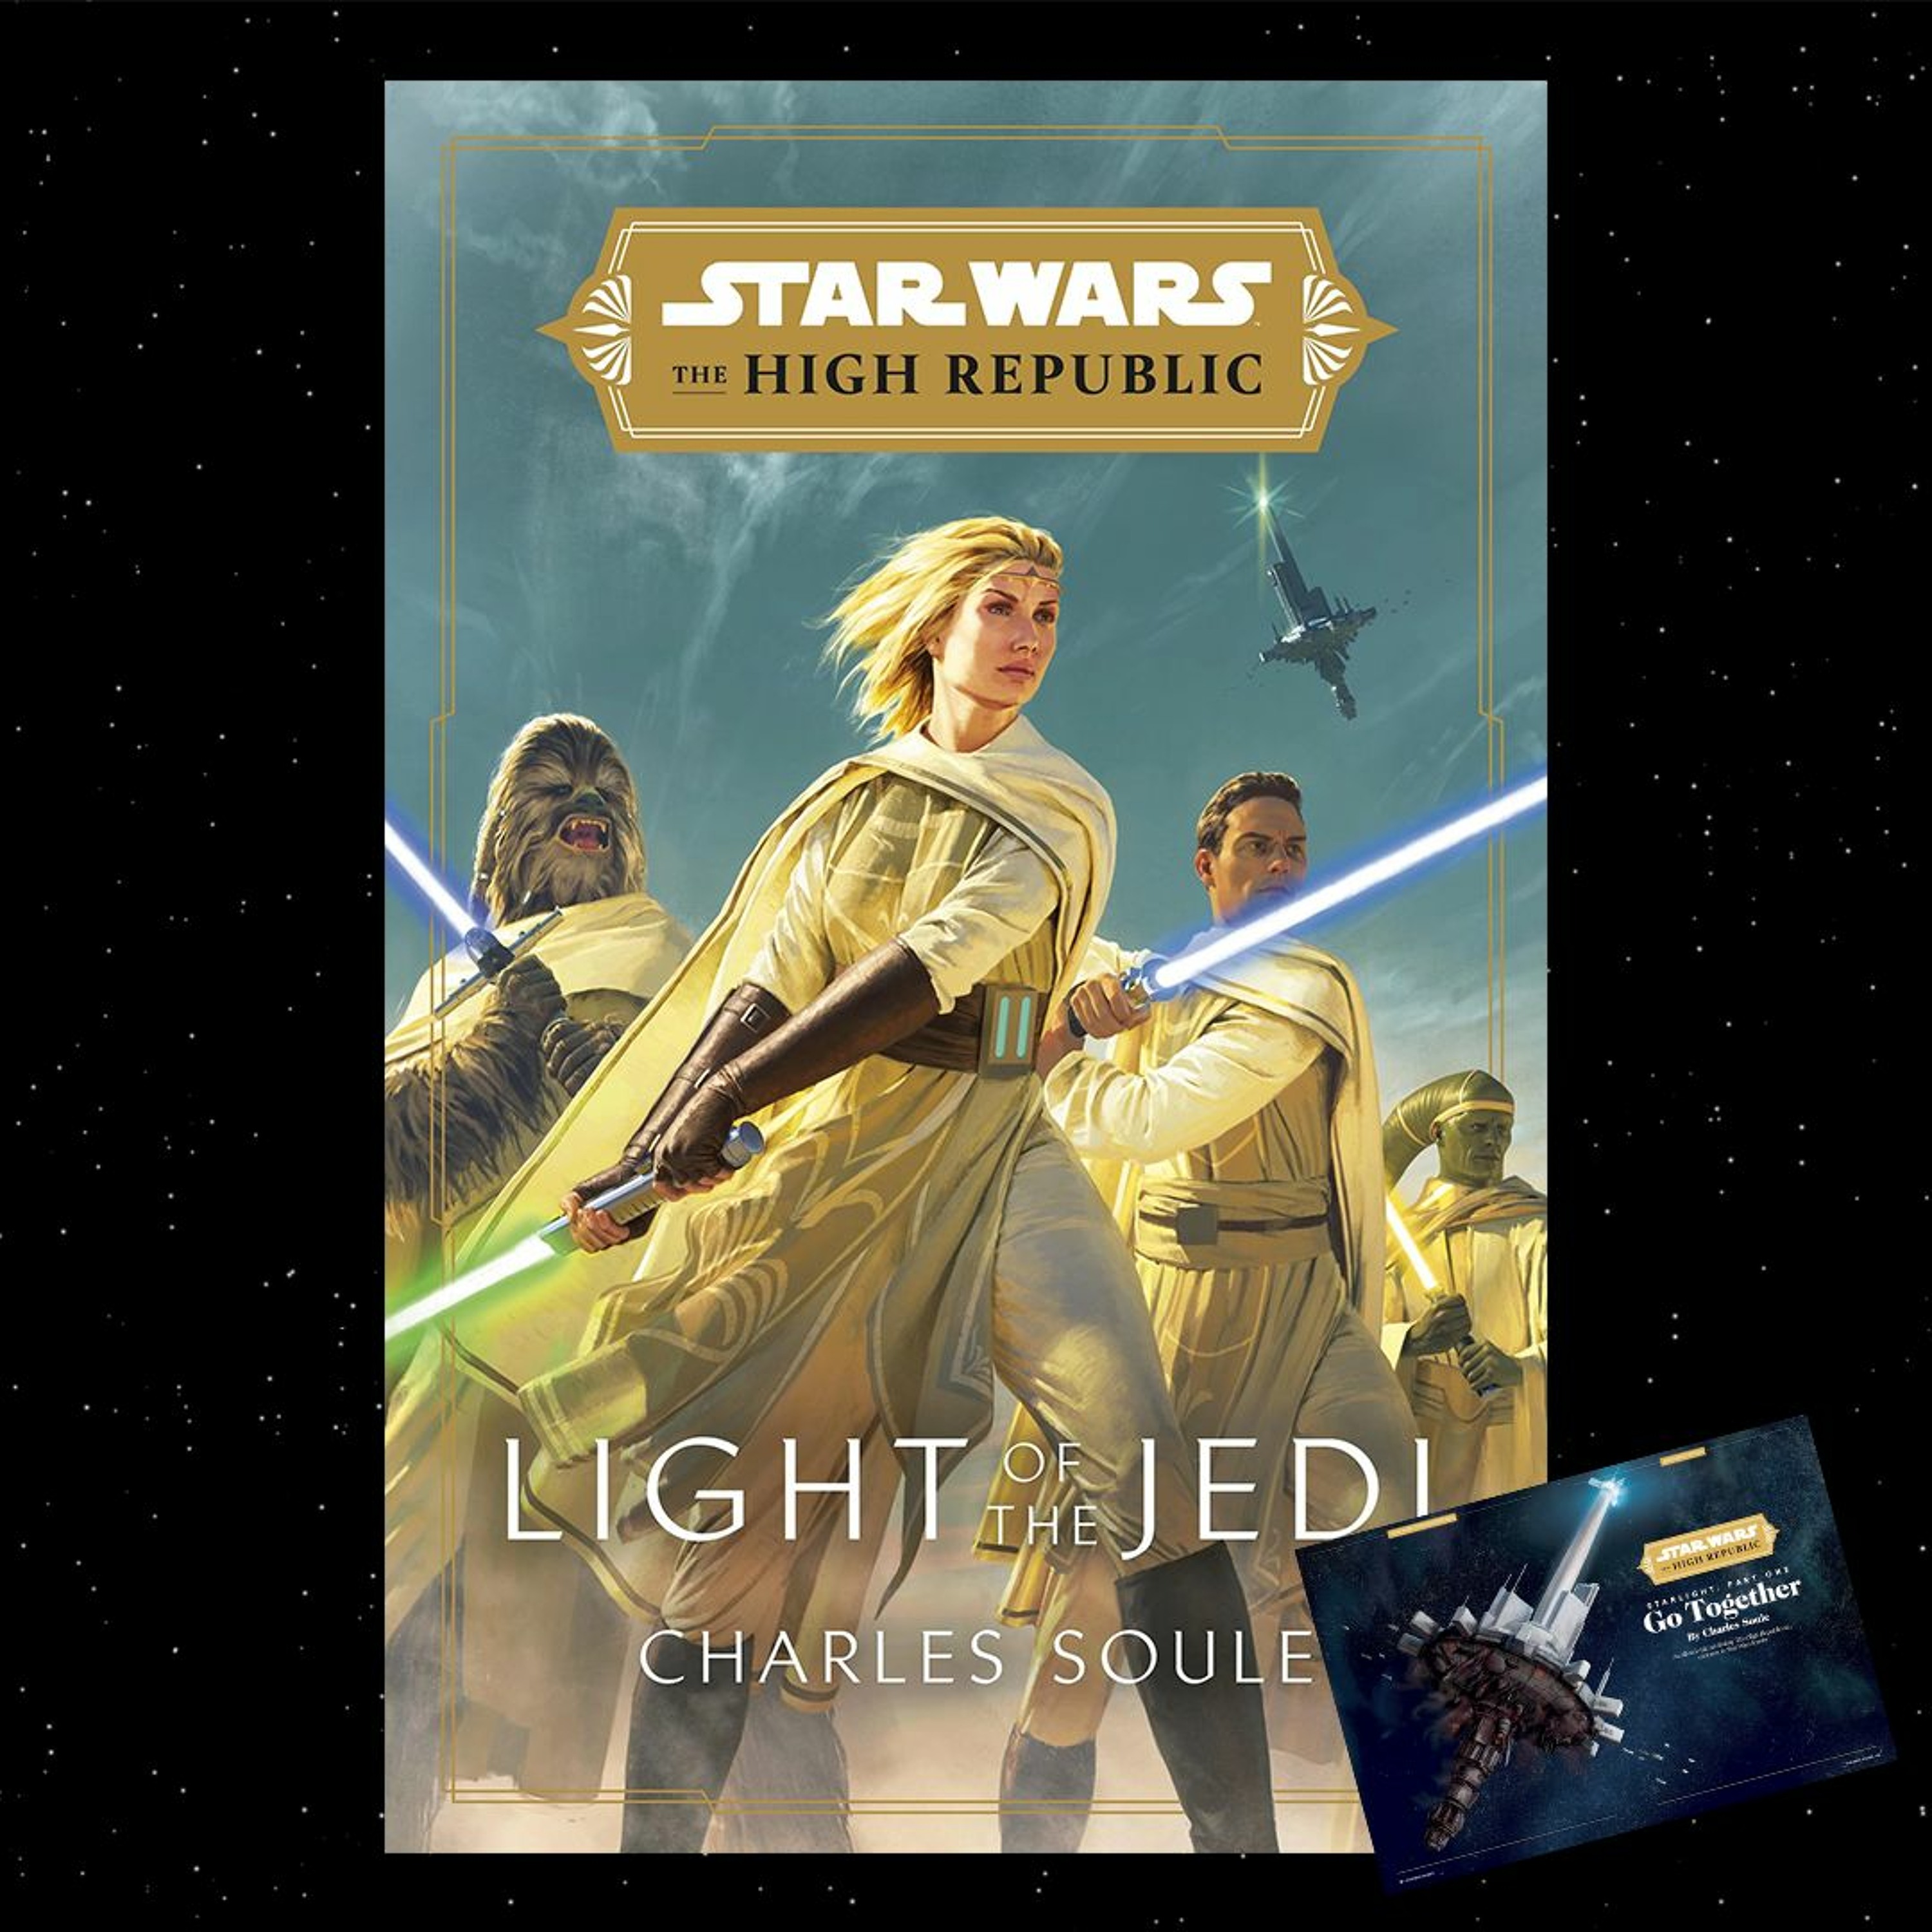 Light of the Jedi - A Beacon of Hope for the High Republic?